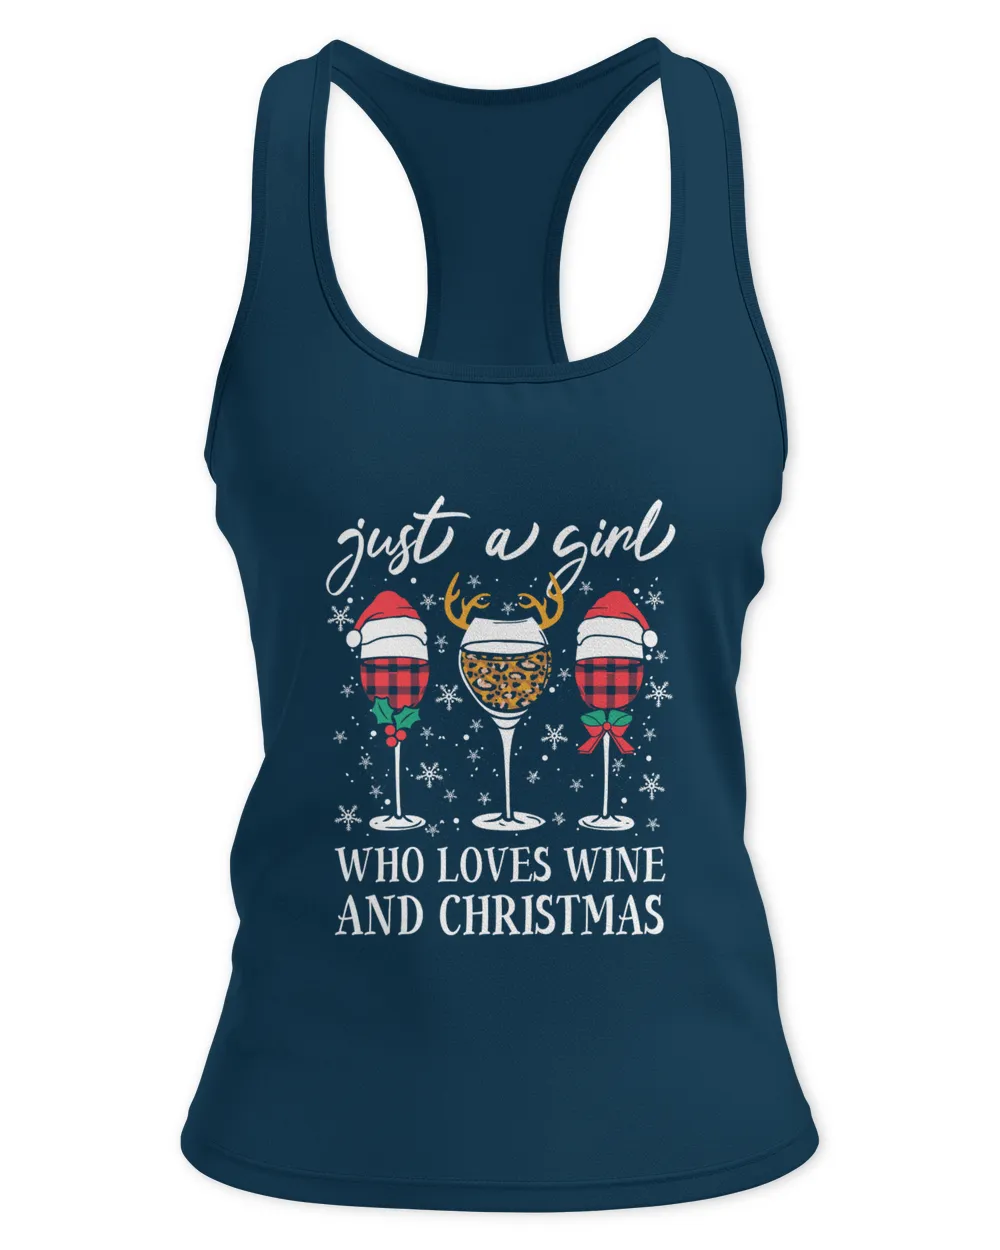 Just A Girl Who Loves Wine And Christmas Women's Standard T-Shirt